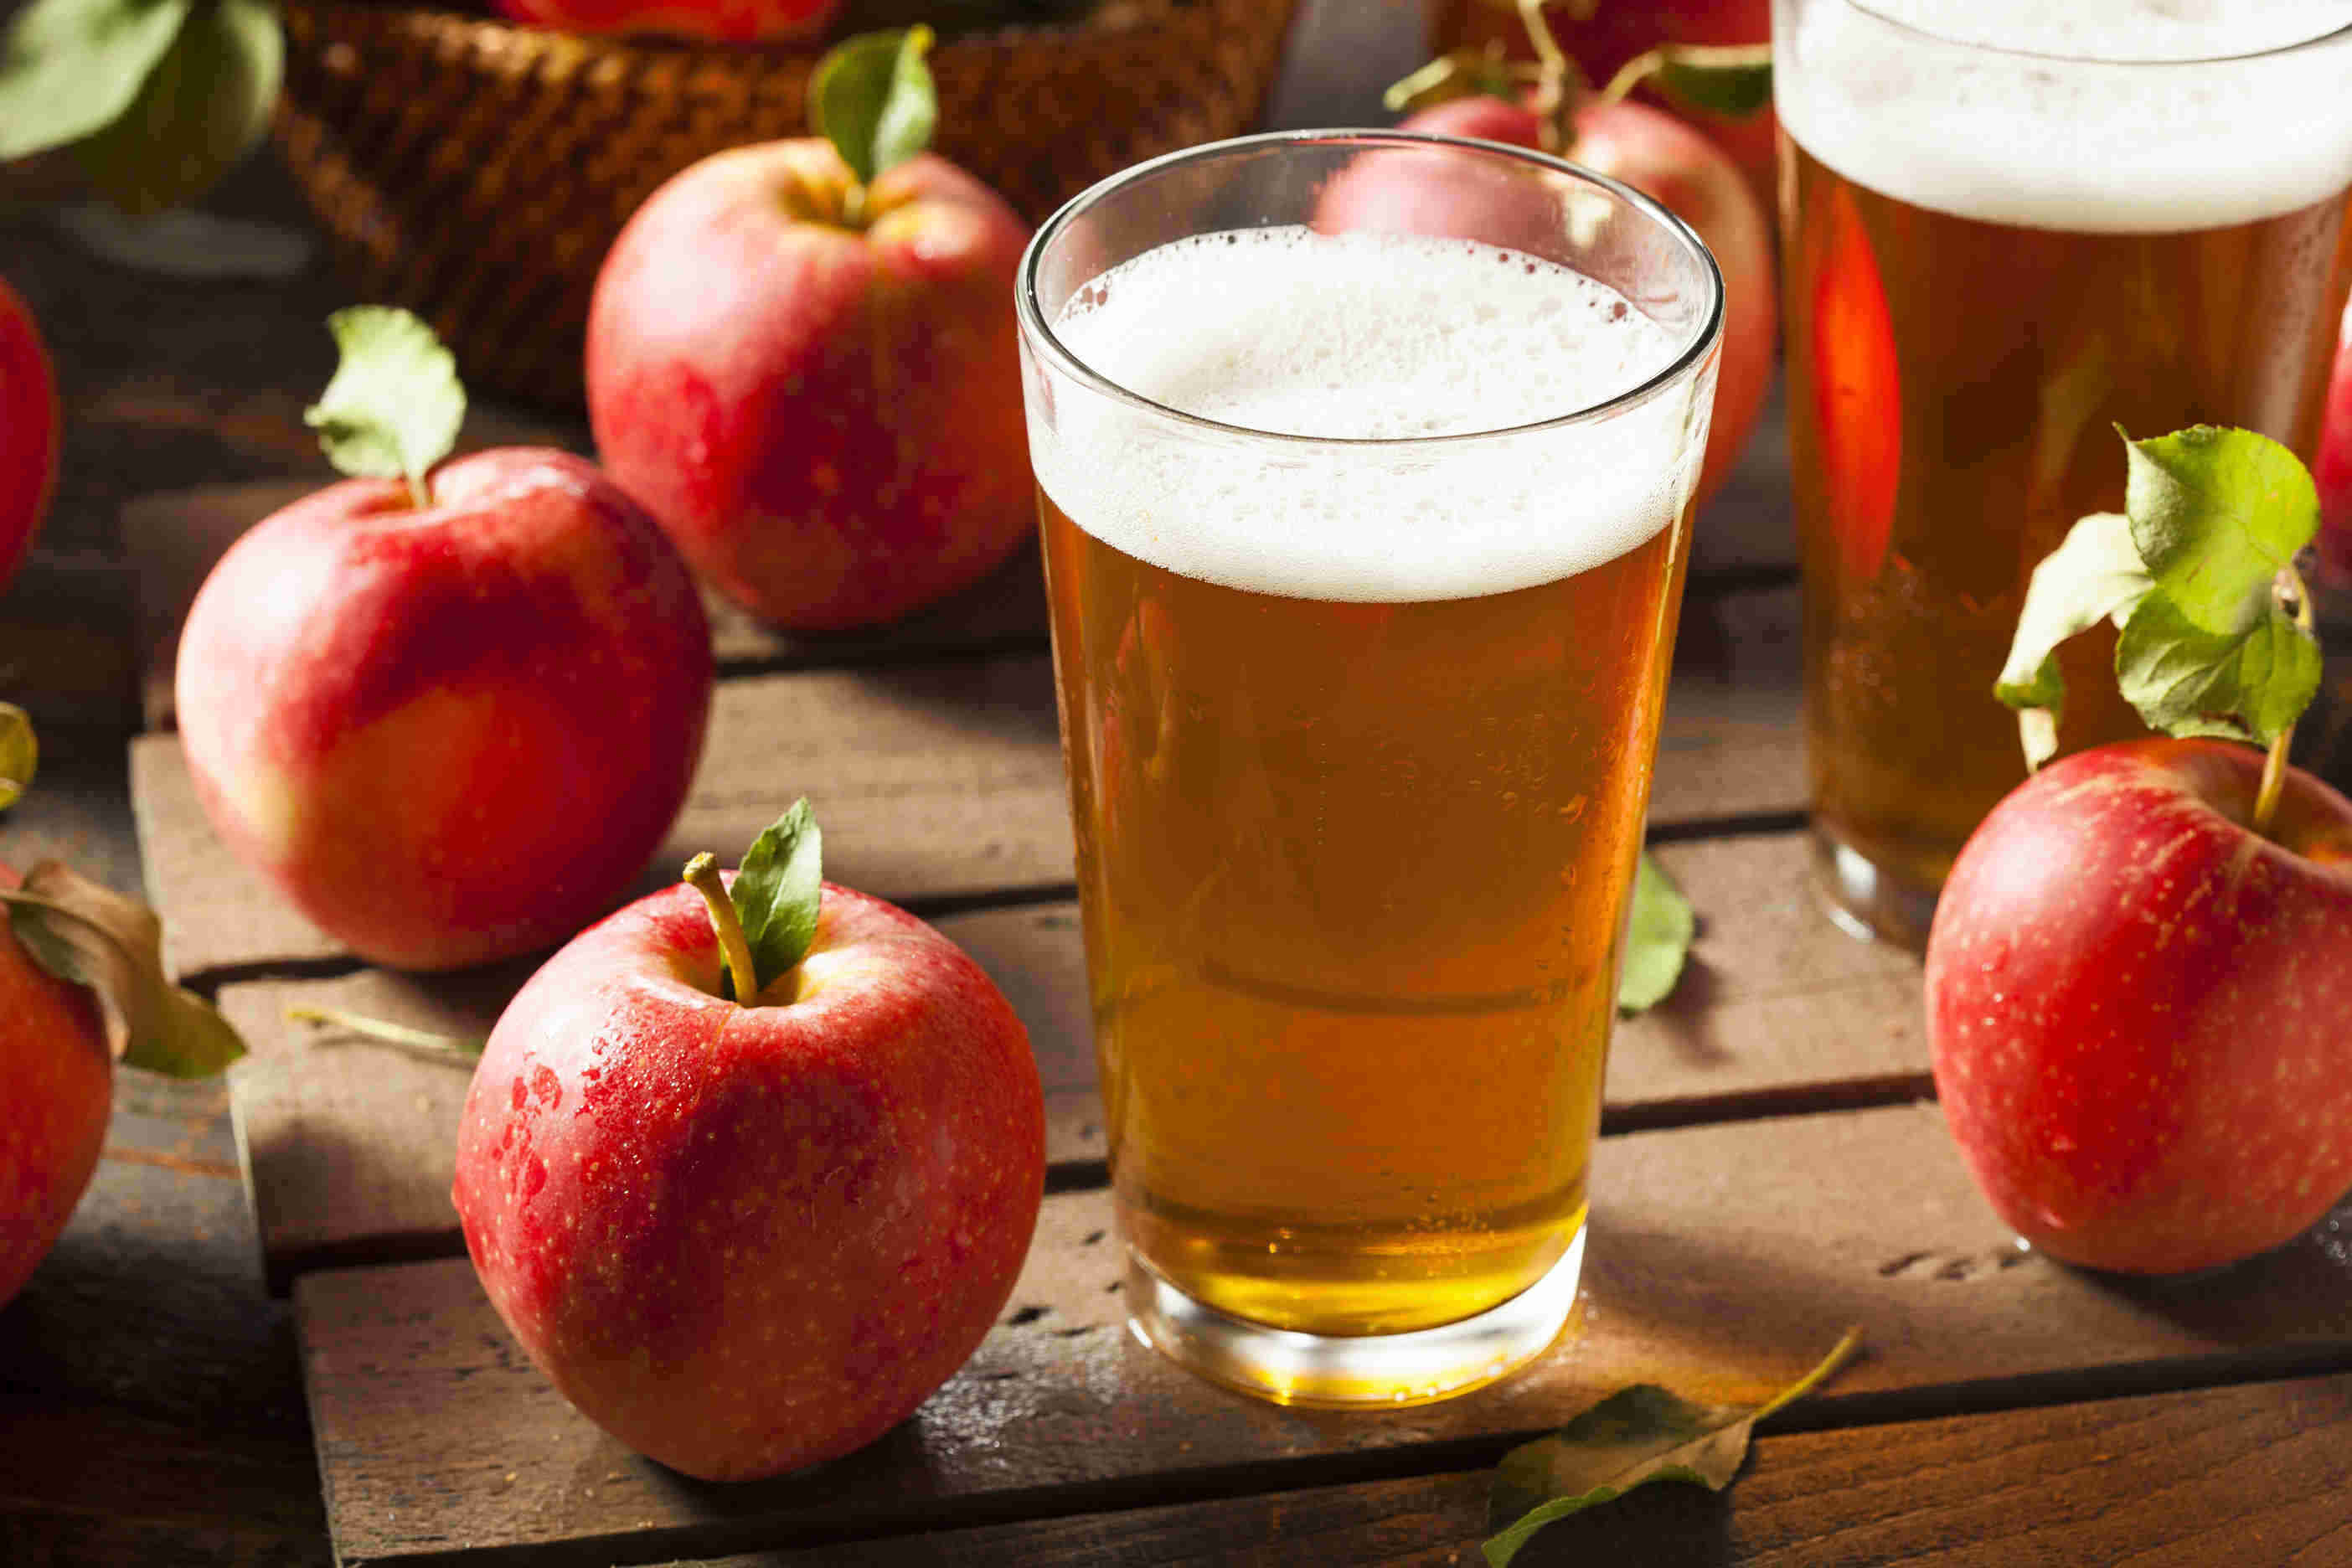 Apple remains the most drunk type of cider with 38% of RoI consumers having  drunk it in the last three months.